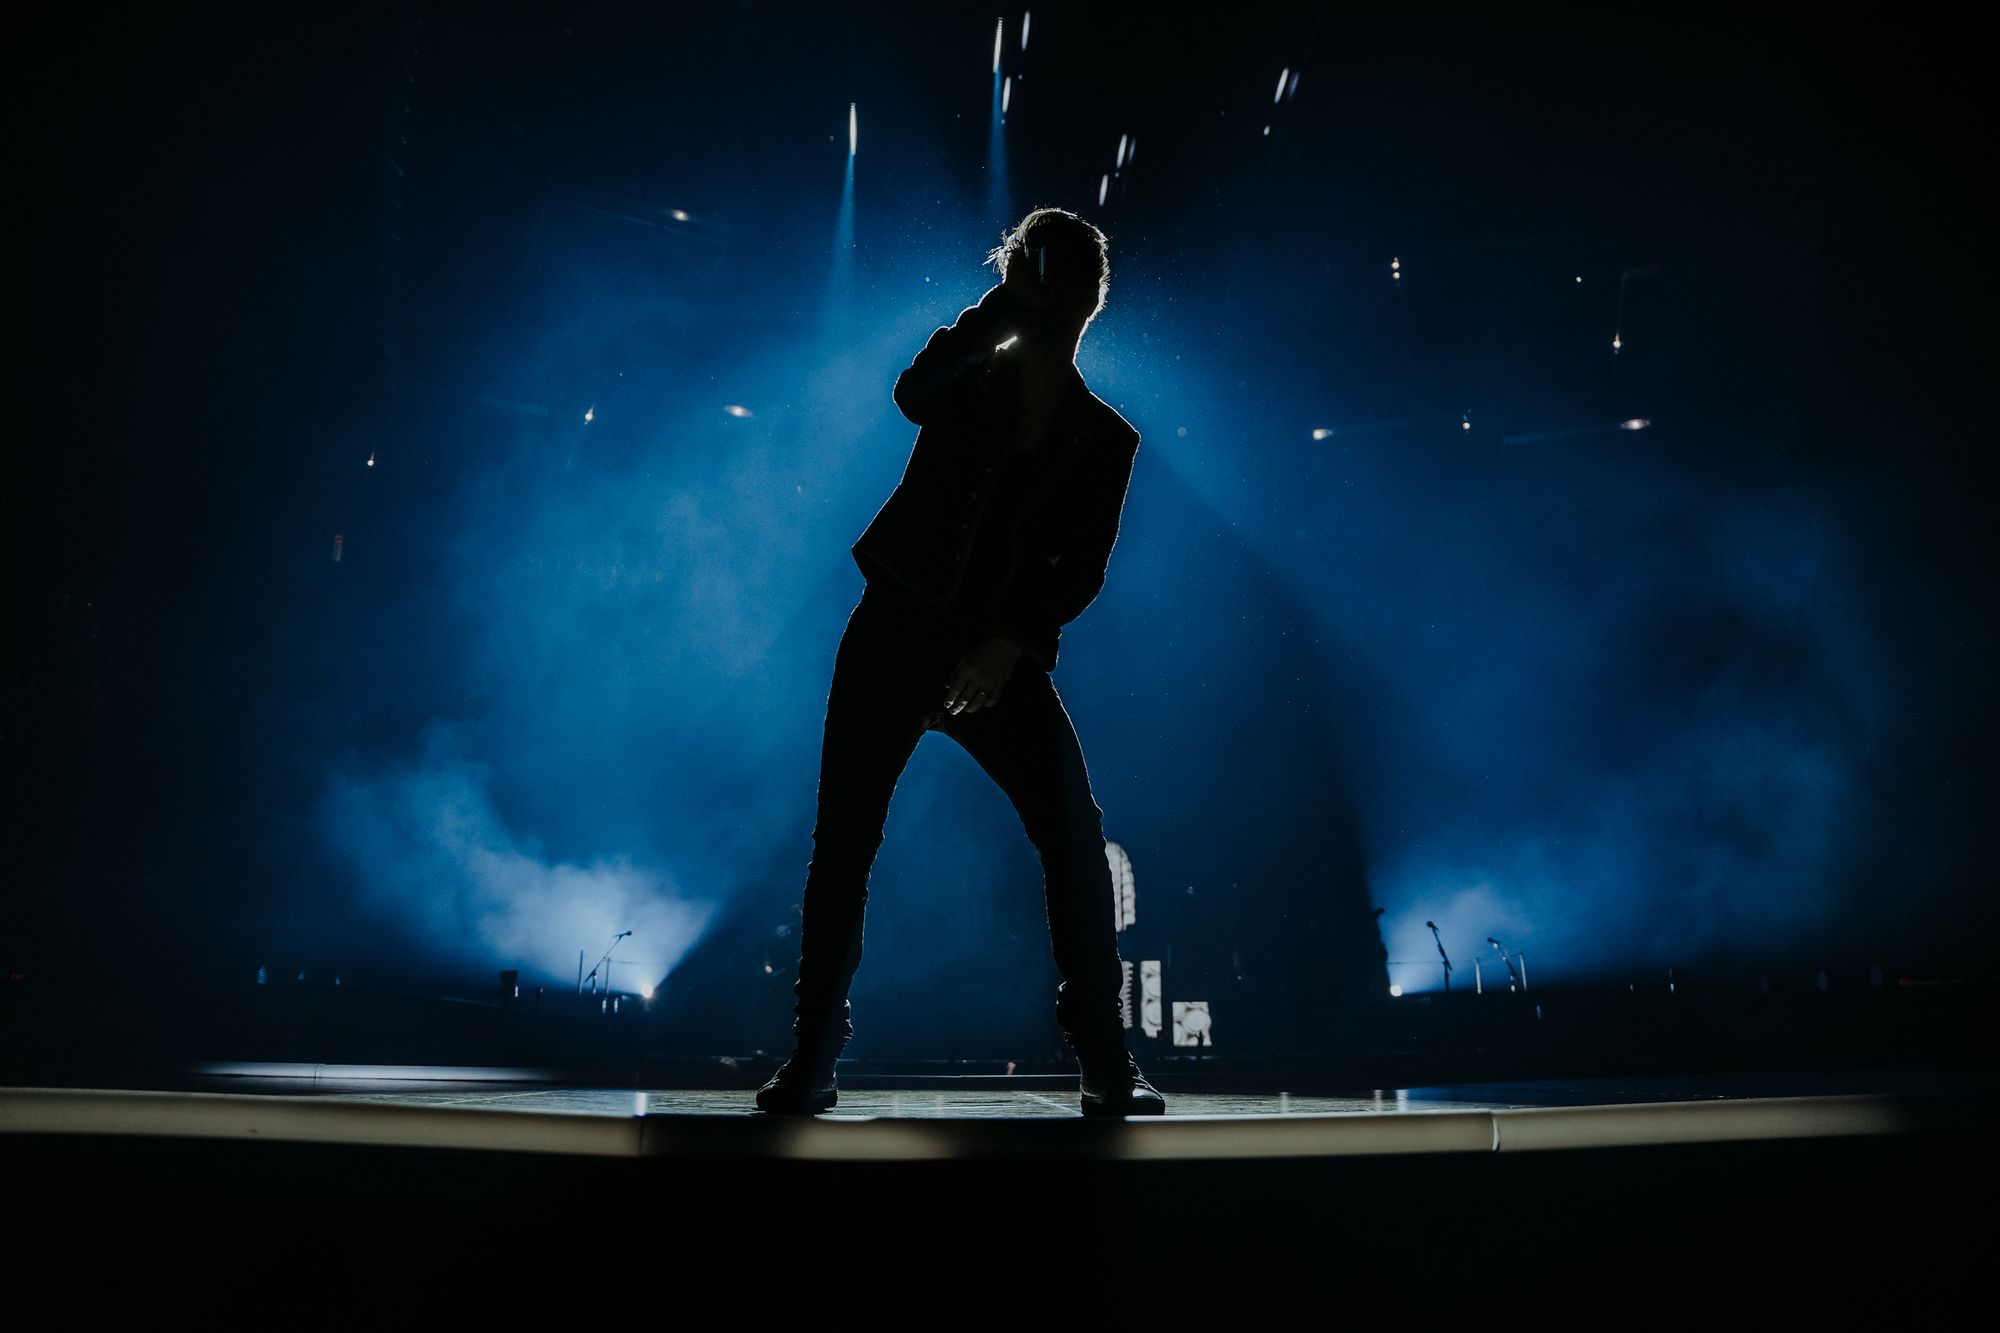 PANIC! AT THE DISCO BRINGS VIVA LAS VENGEANCE TO RALEIGH